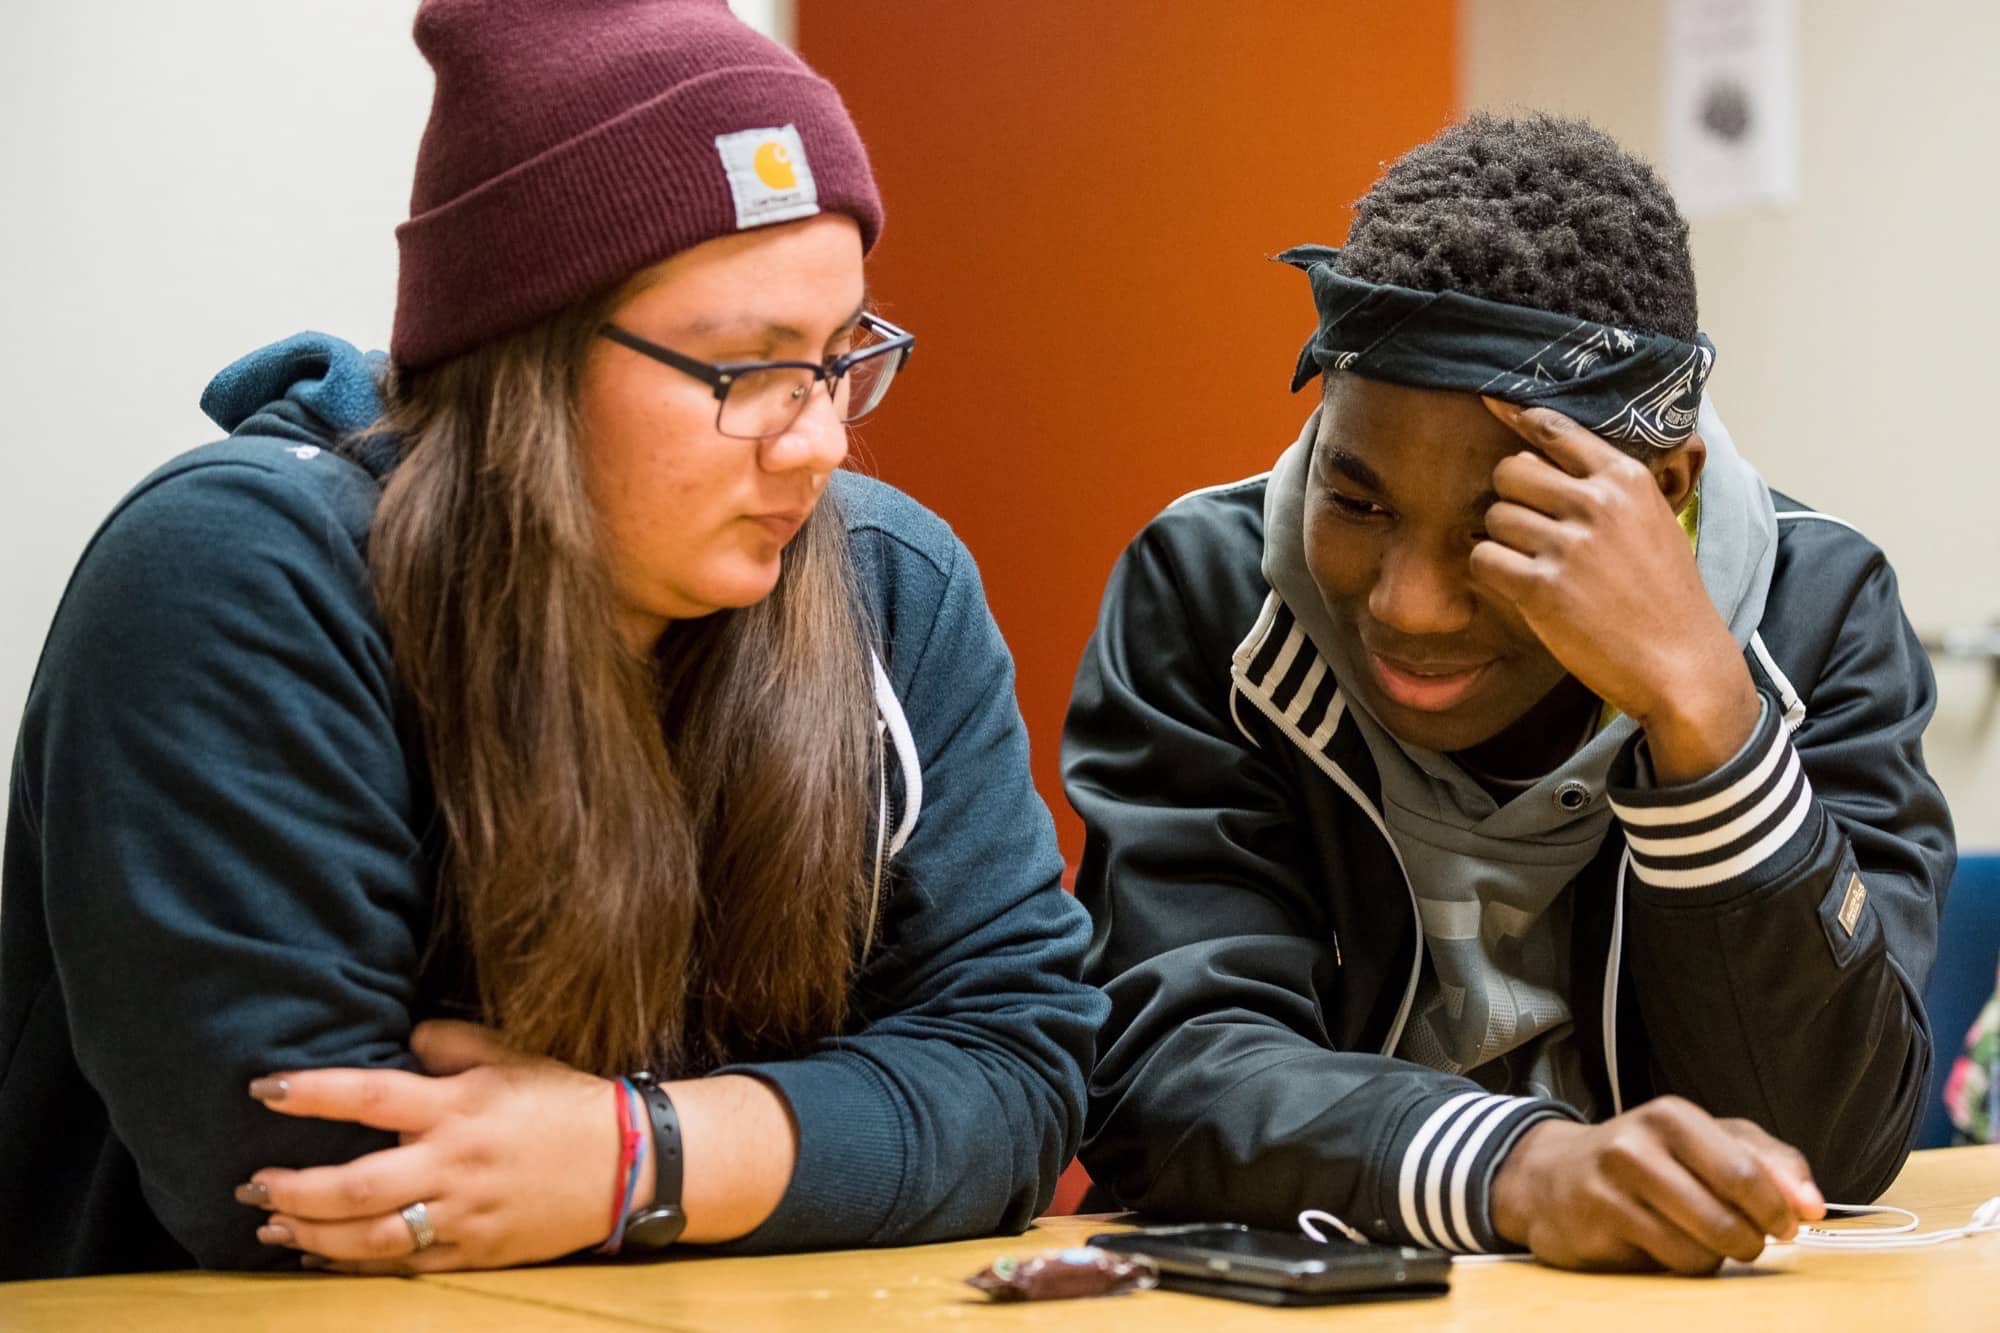 Image of a white youth female in a knit cap sitting with a black young man, both looking at a cell phone sitting on the table in front of them.